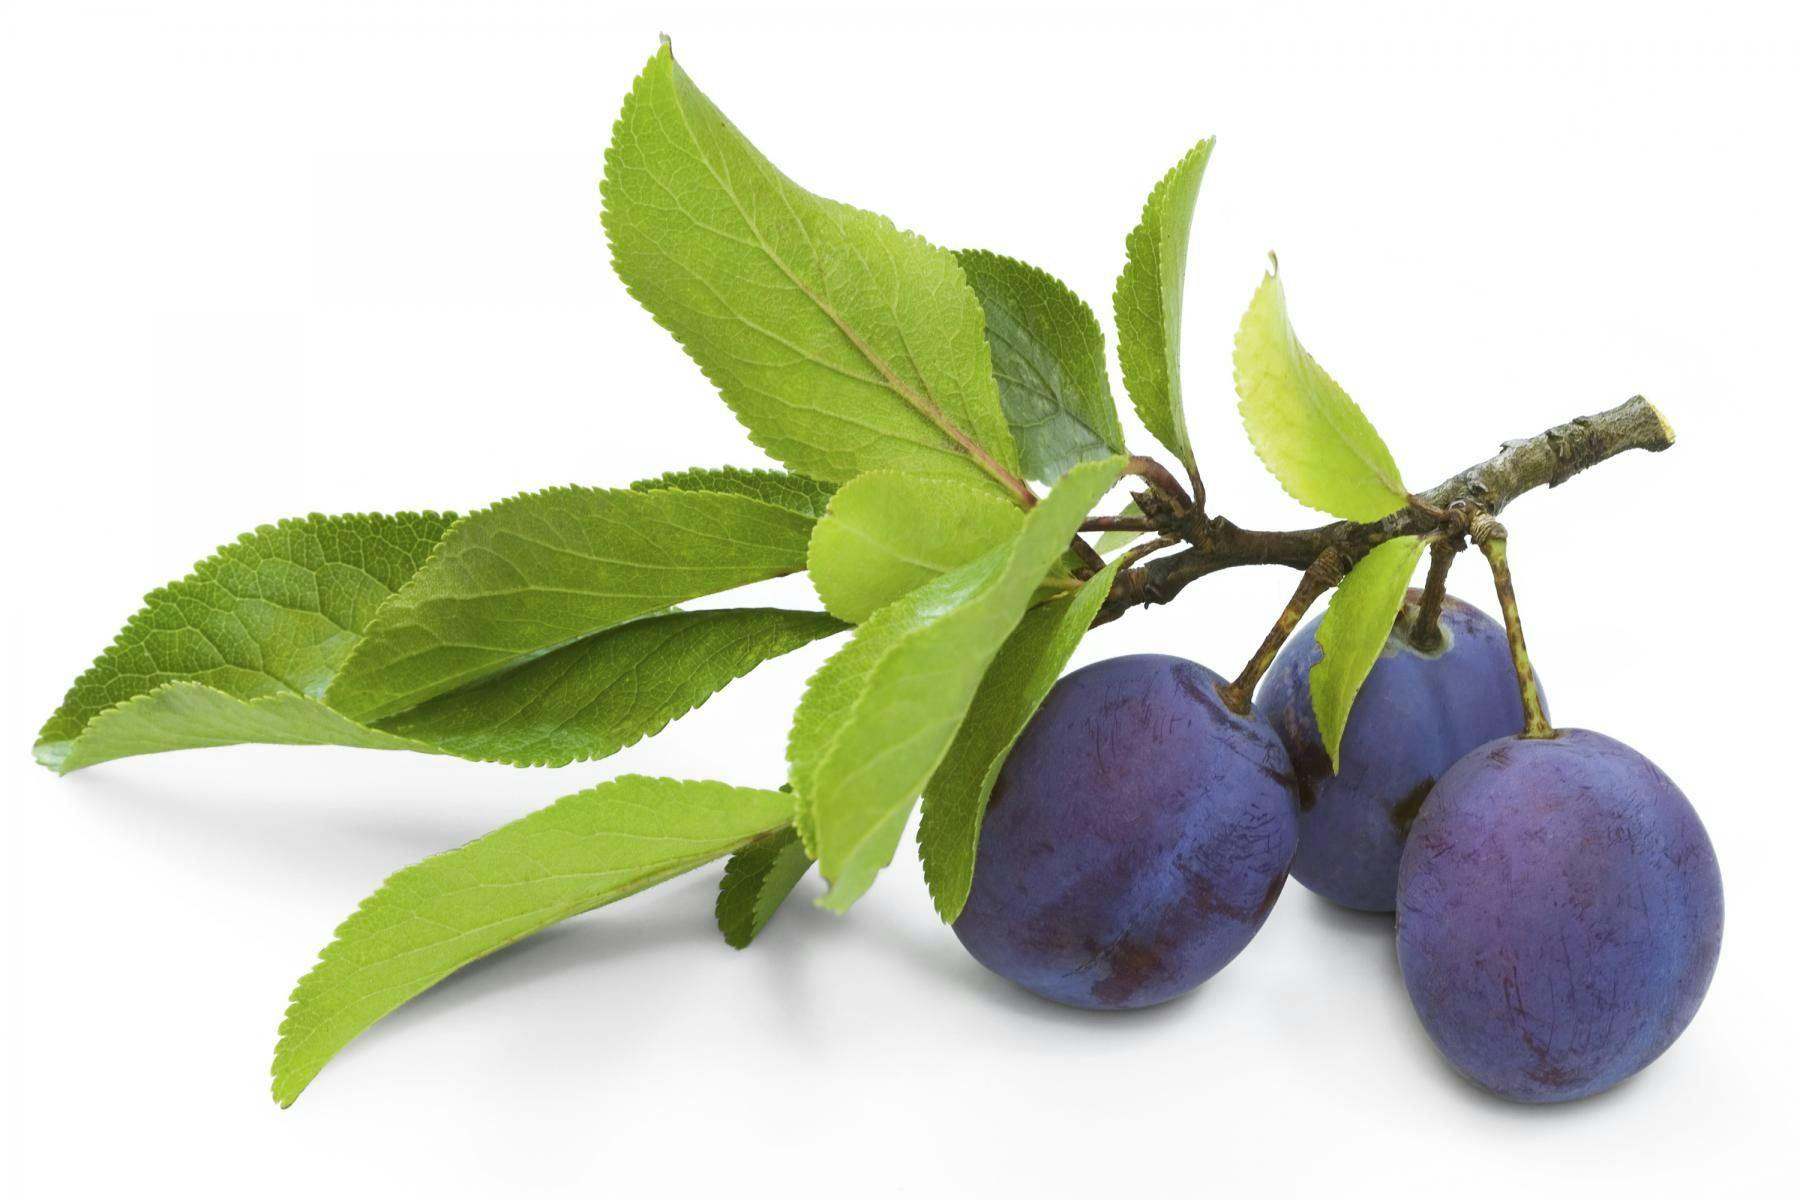 Pygeum Supplies Are Short, Company Offers Alternative from the Plum Tree 